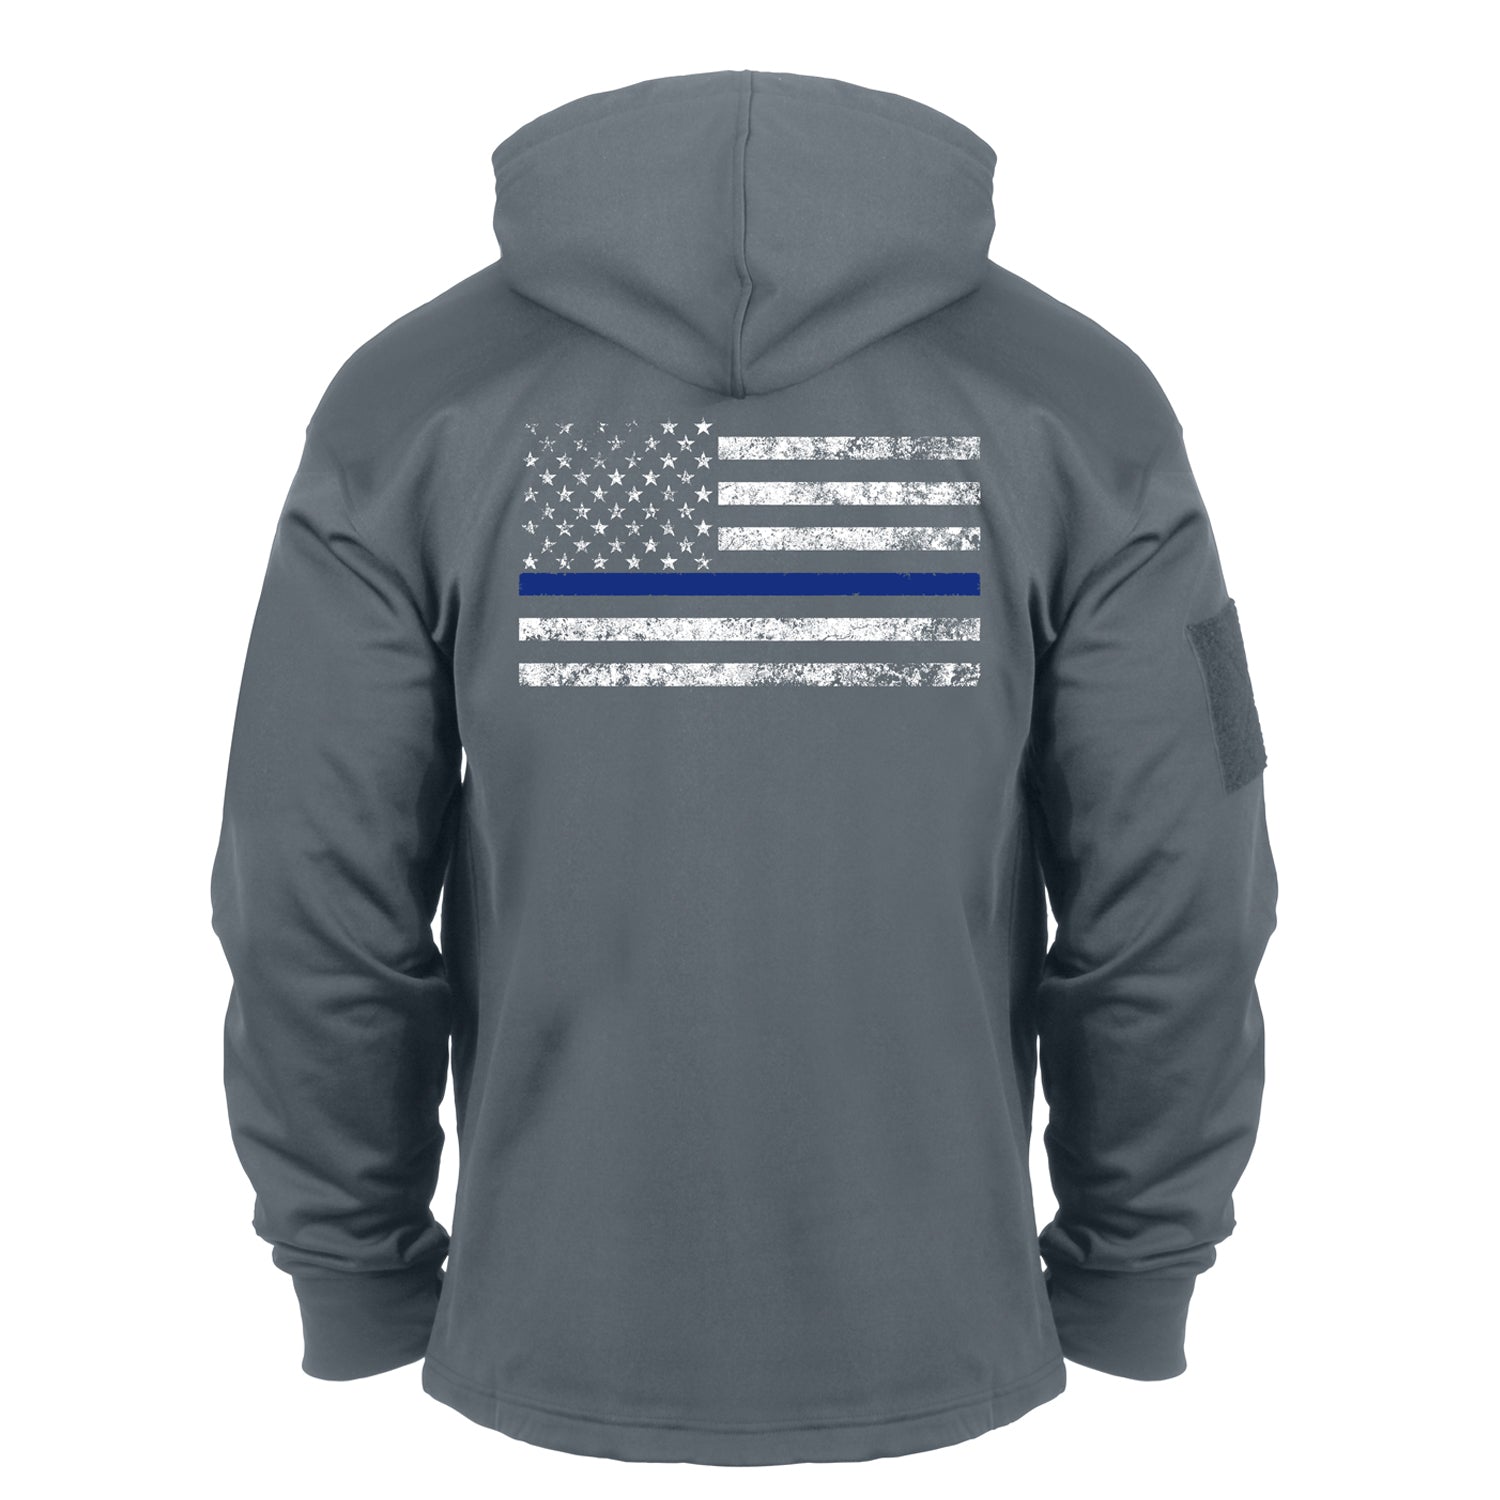 Rothco Concealed Carry Sweatshirt Grey Blue Lines (52075)